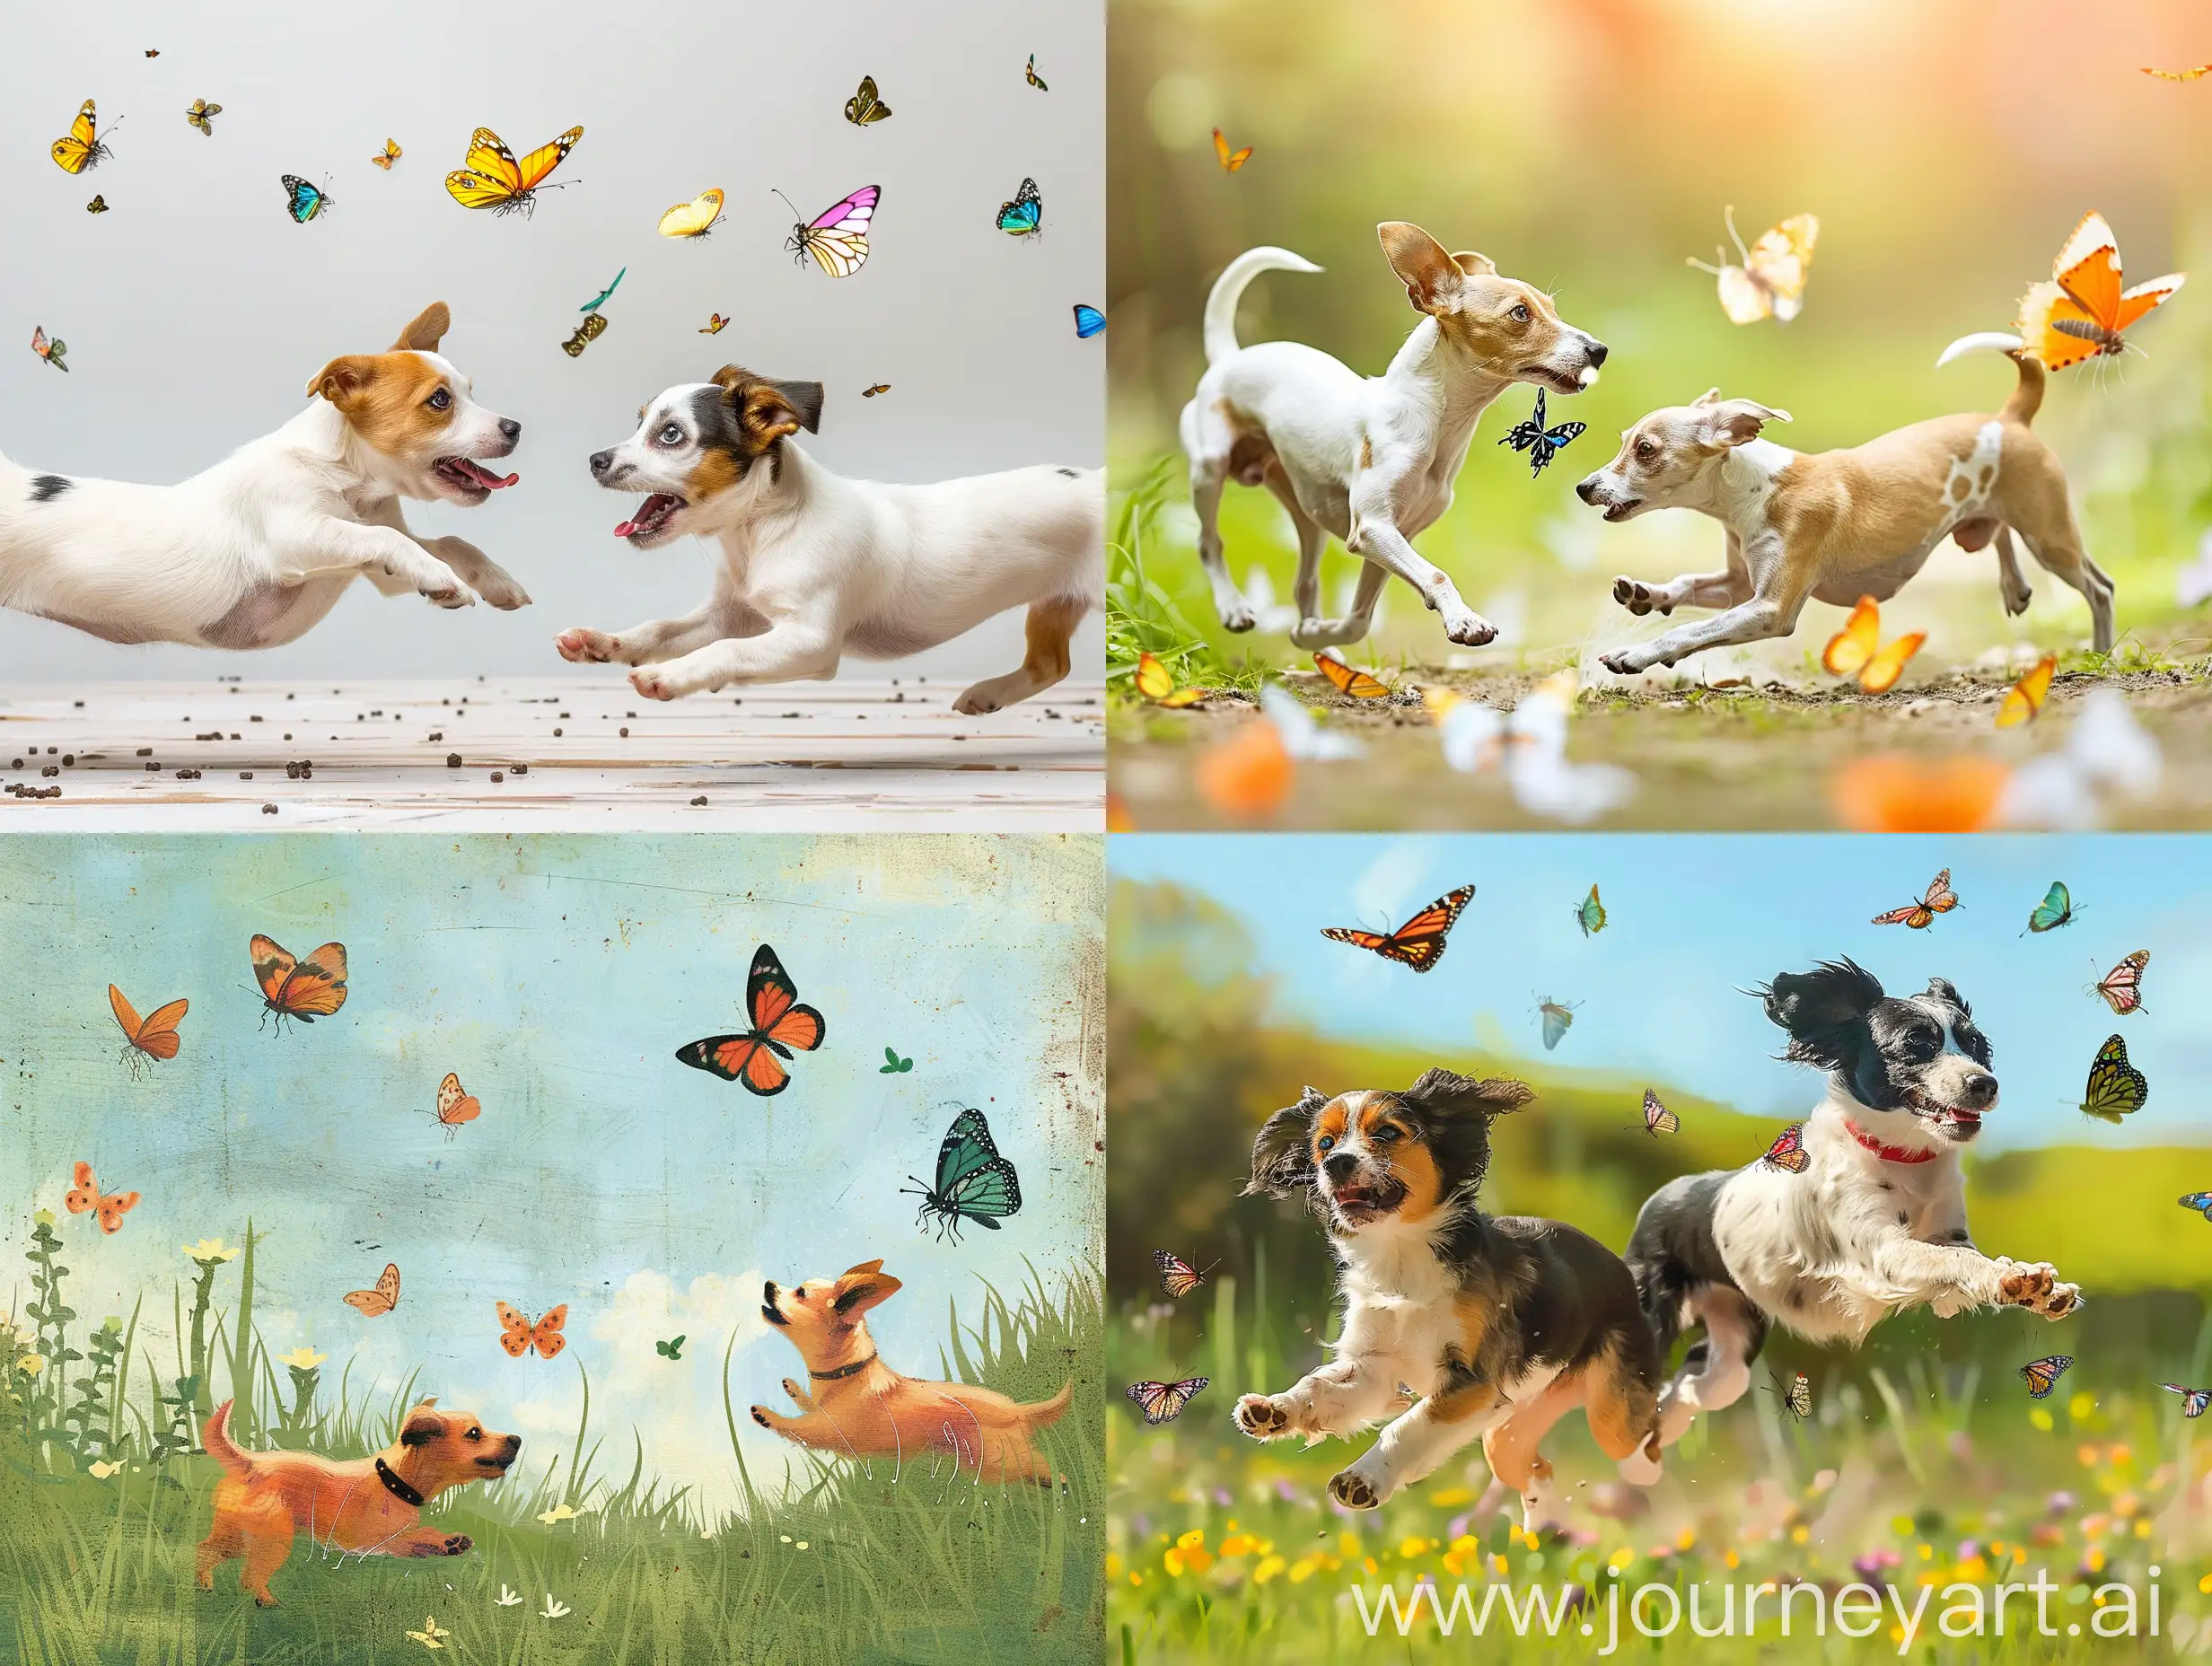 Playful-Puppies-Chasing-Colorful-Butterflies